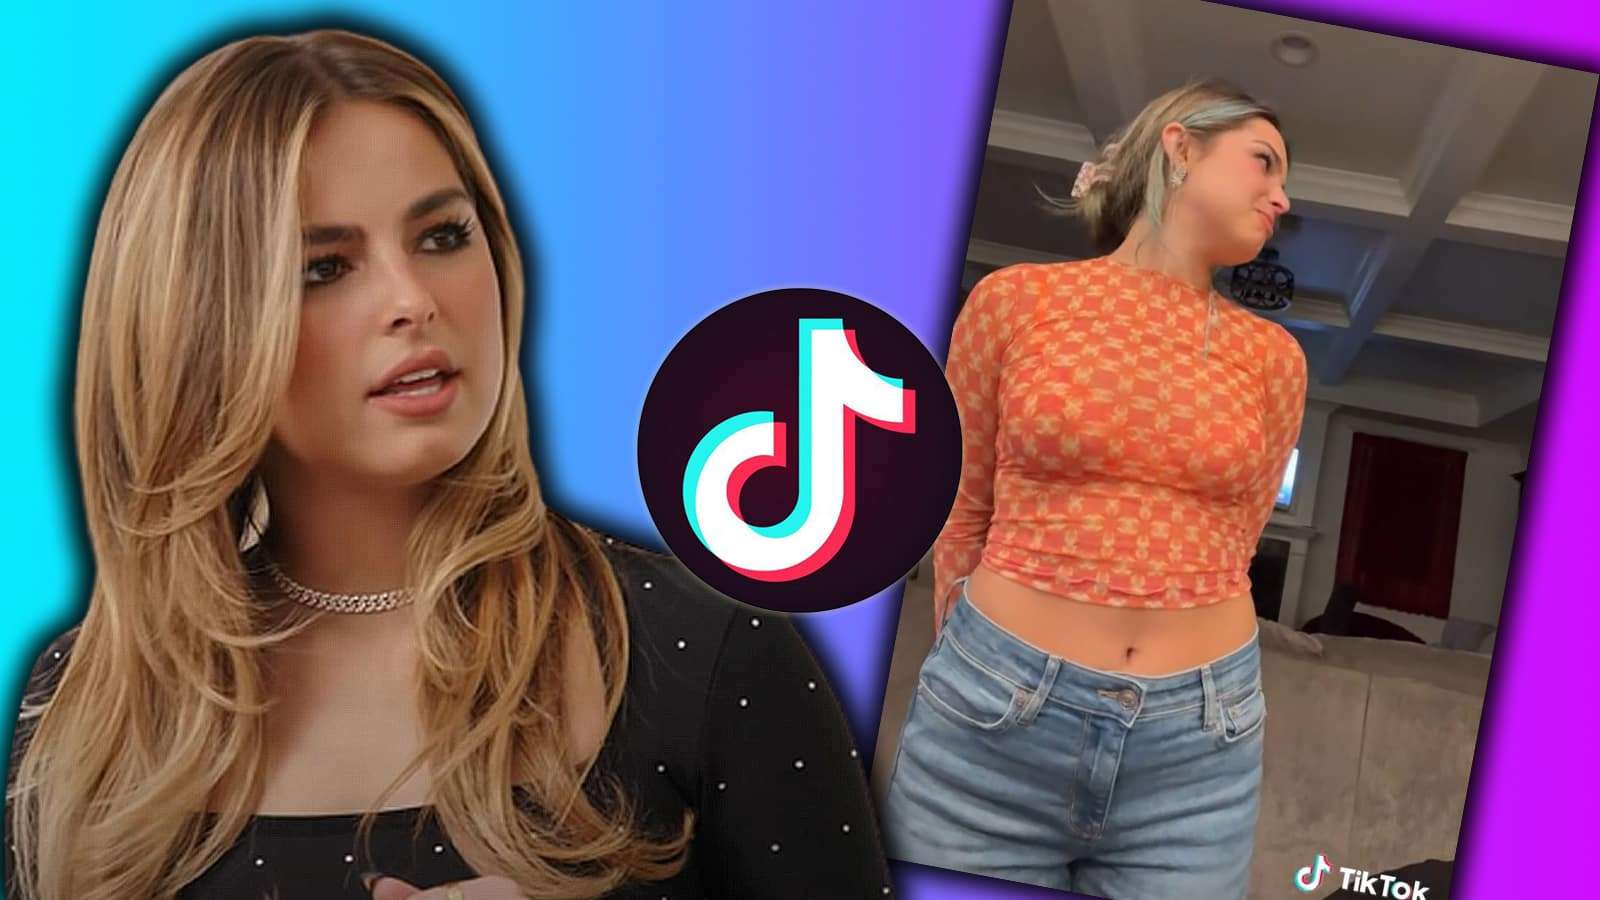 Addison Rae hits back at comments over awkward video